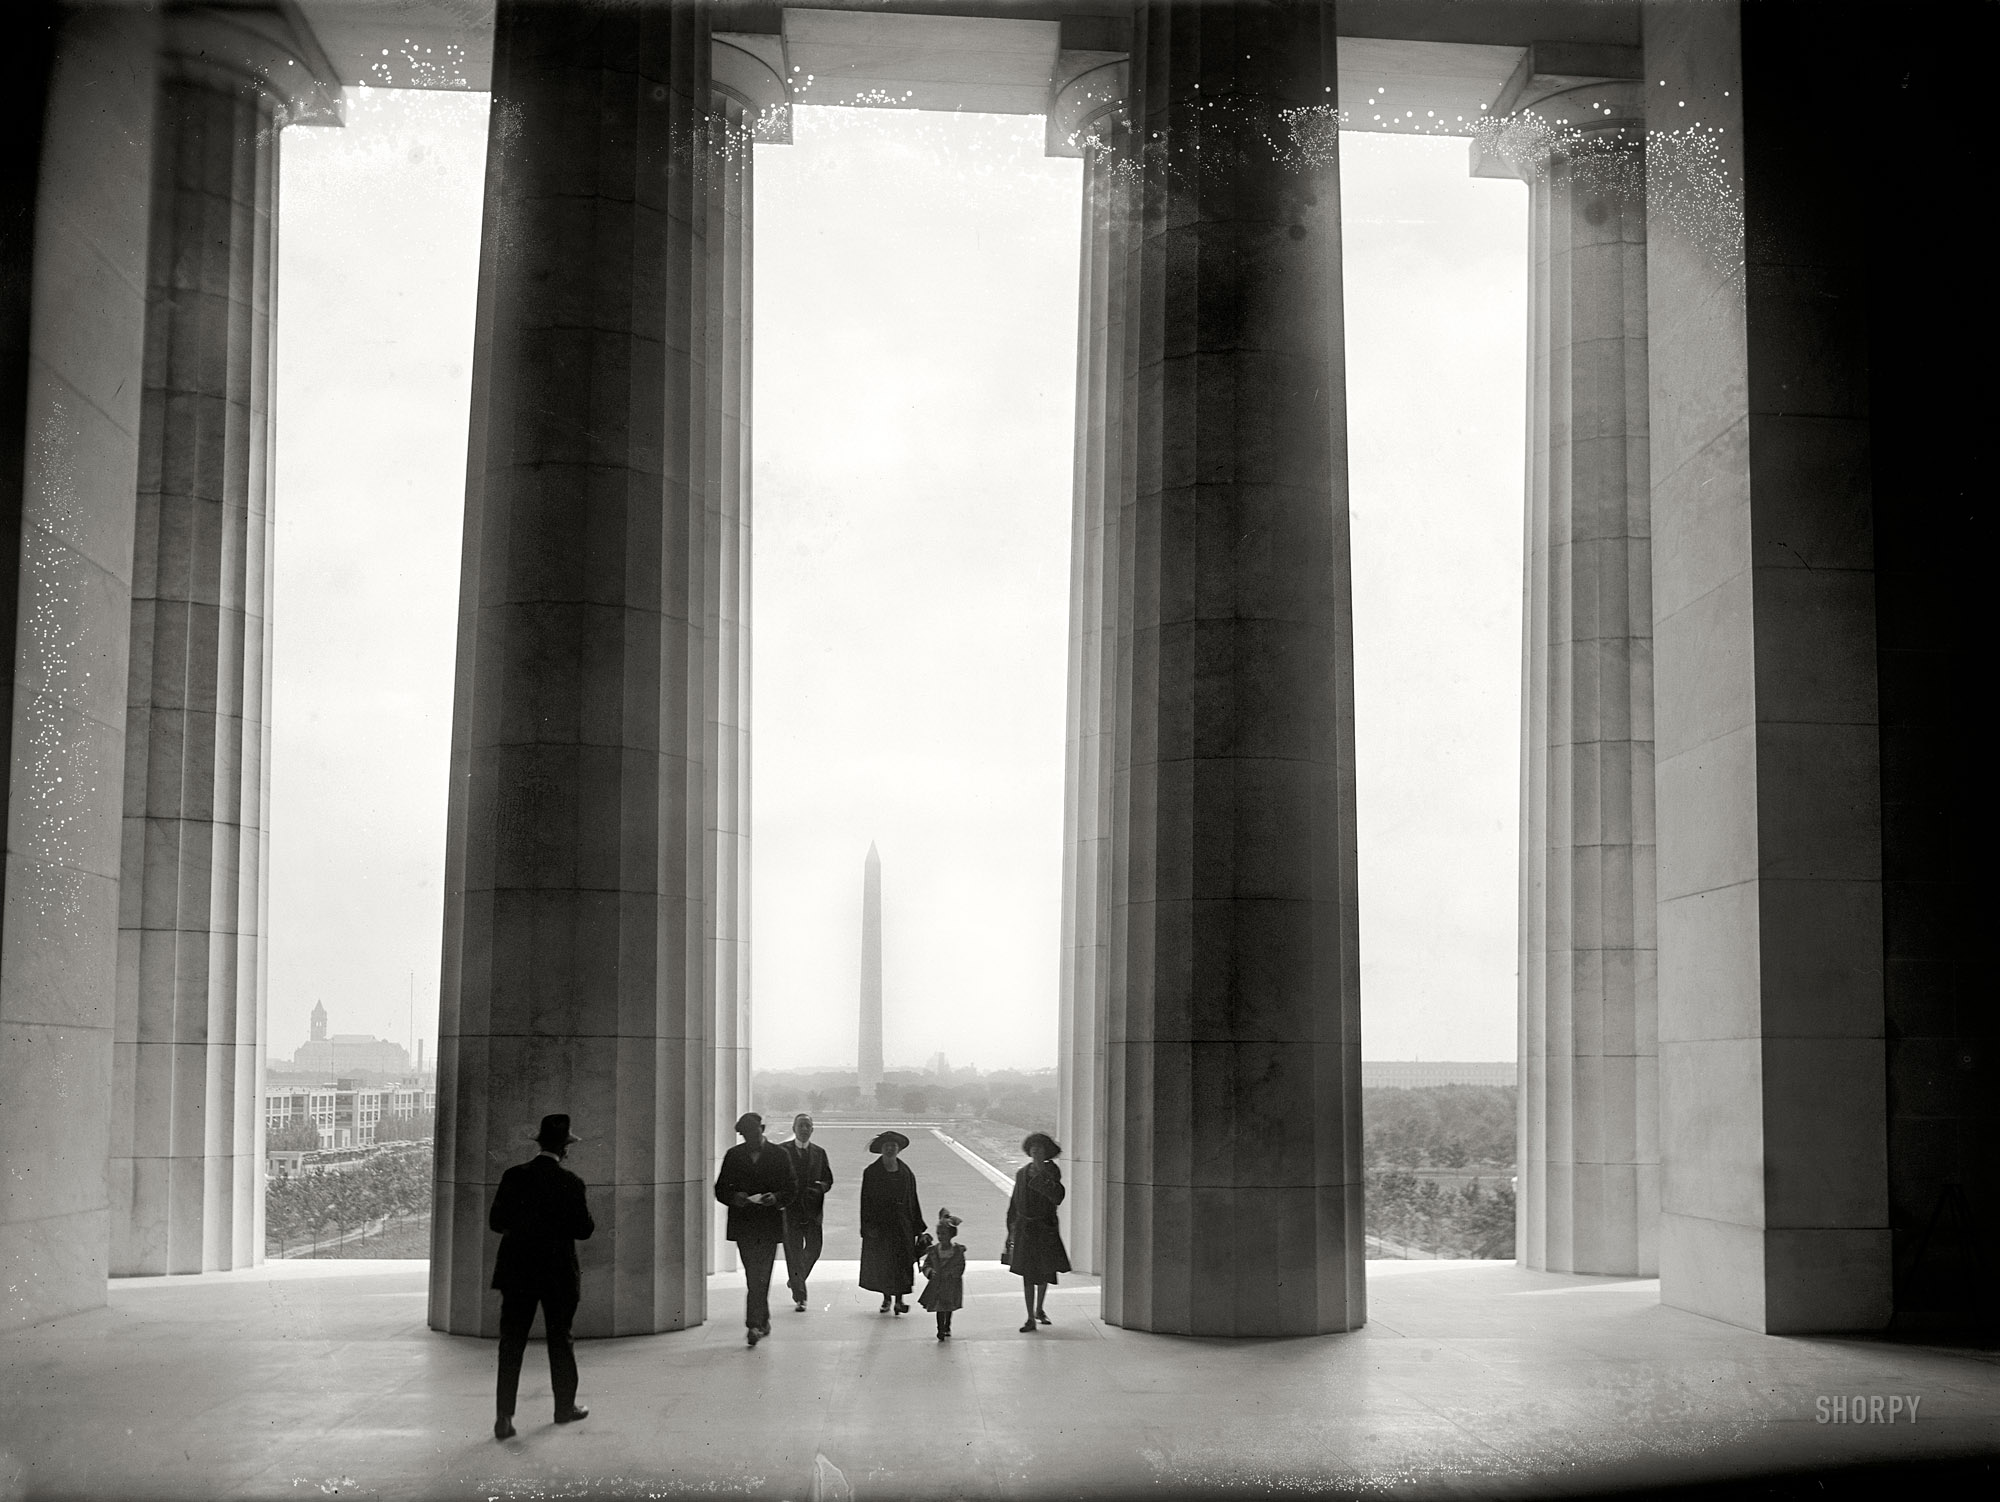 May 5, 1922. Washington, D.C. "Vista of Monument from Lincoln Memorial." National Photo Company Collection glass negative. View full size.